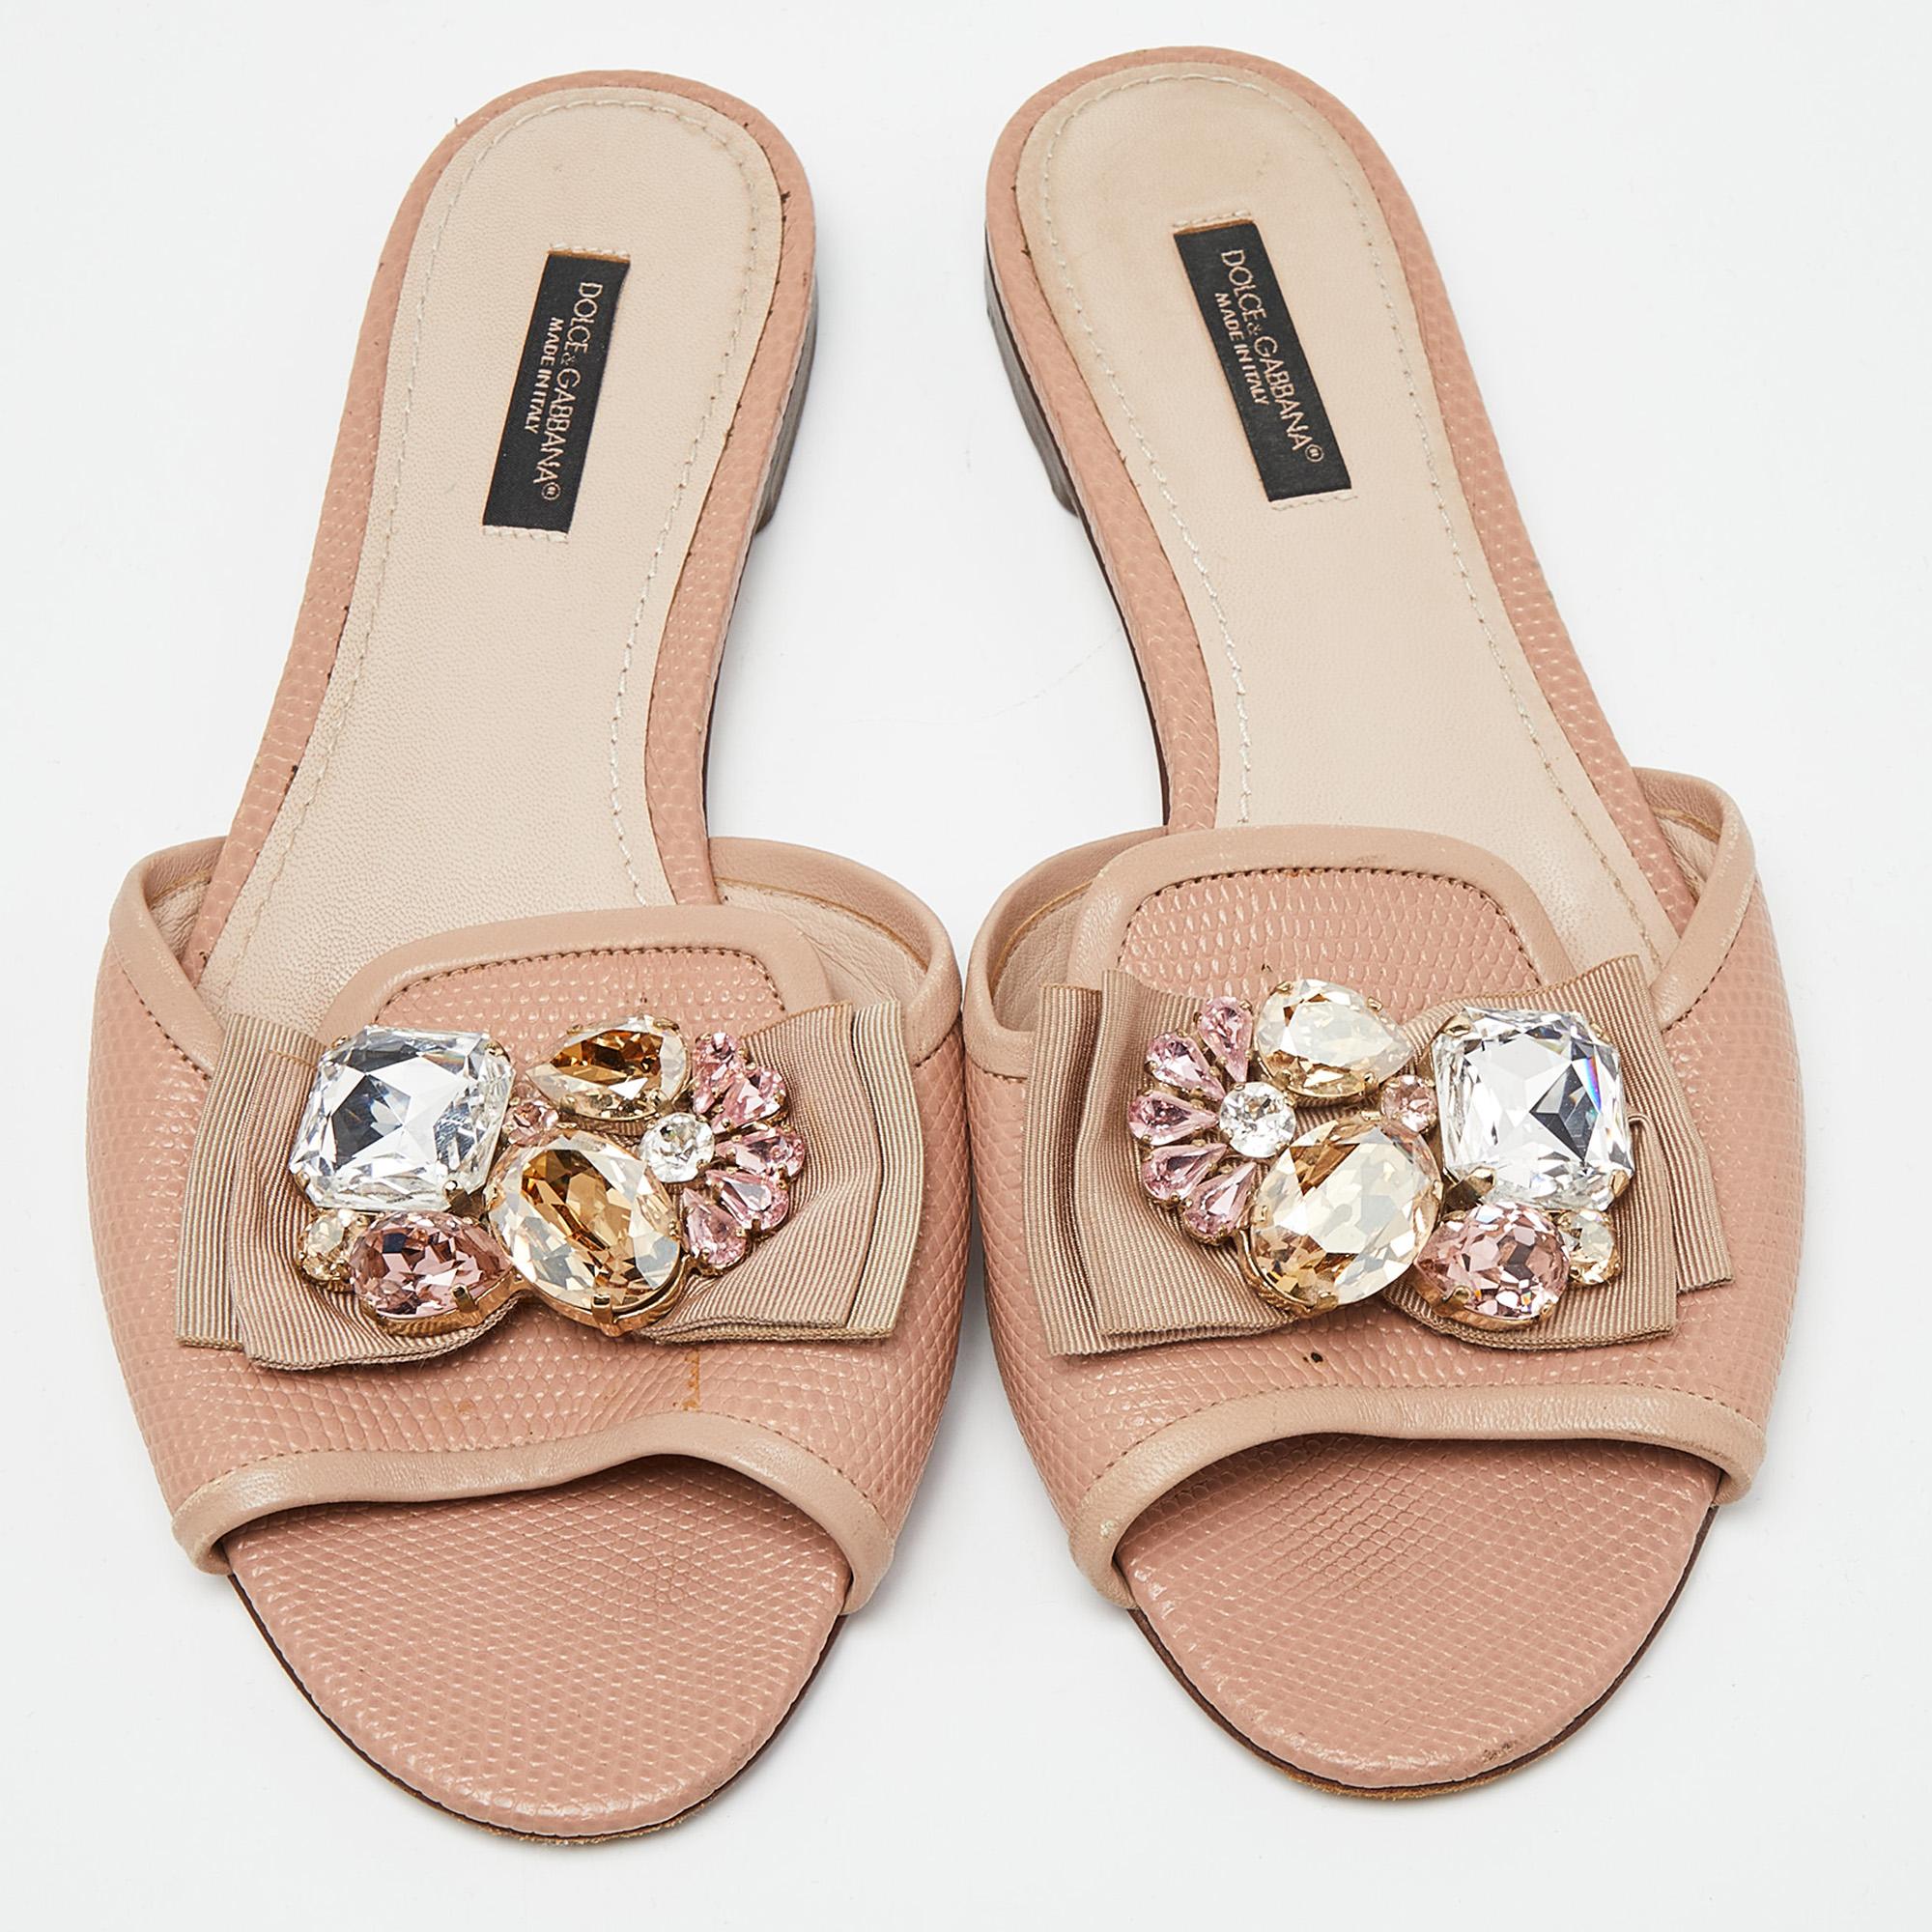 Present your feet with utmost comfort by choosing these flat slides from the house of Dolce & Gabbana. They are crafted from lizard-embossed leather and detailed with a crystal-embellished bow on the uppers. They are complete with durable outsoles.

